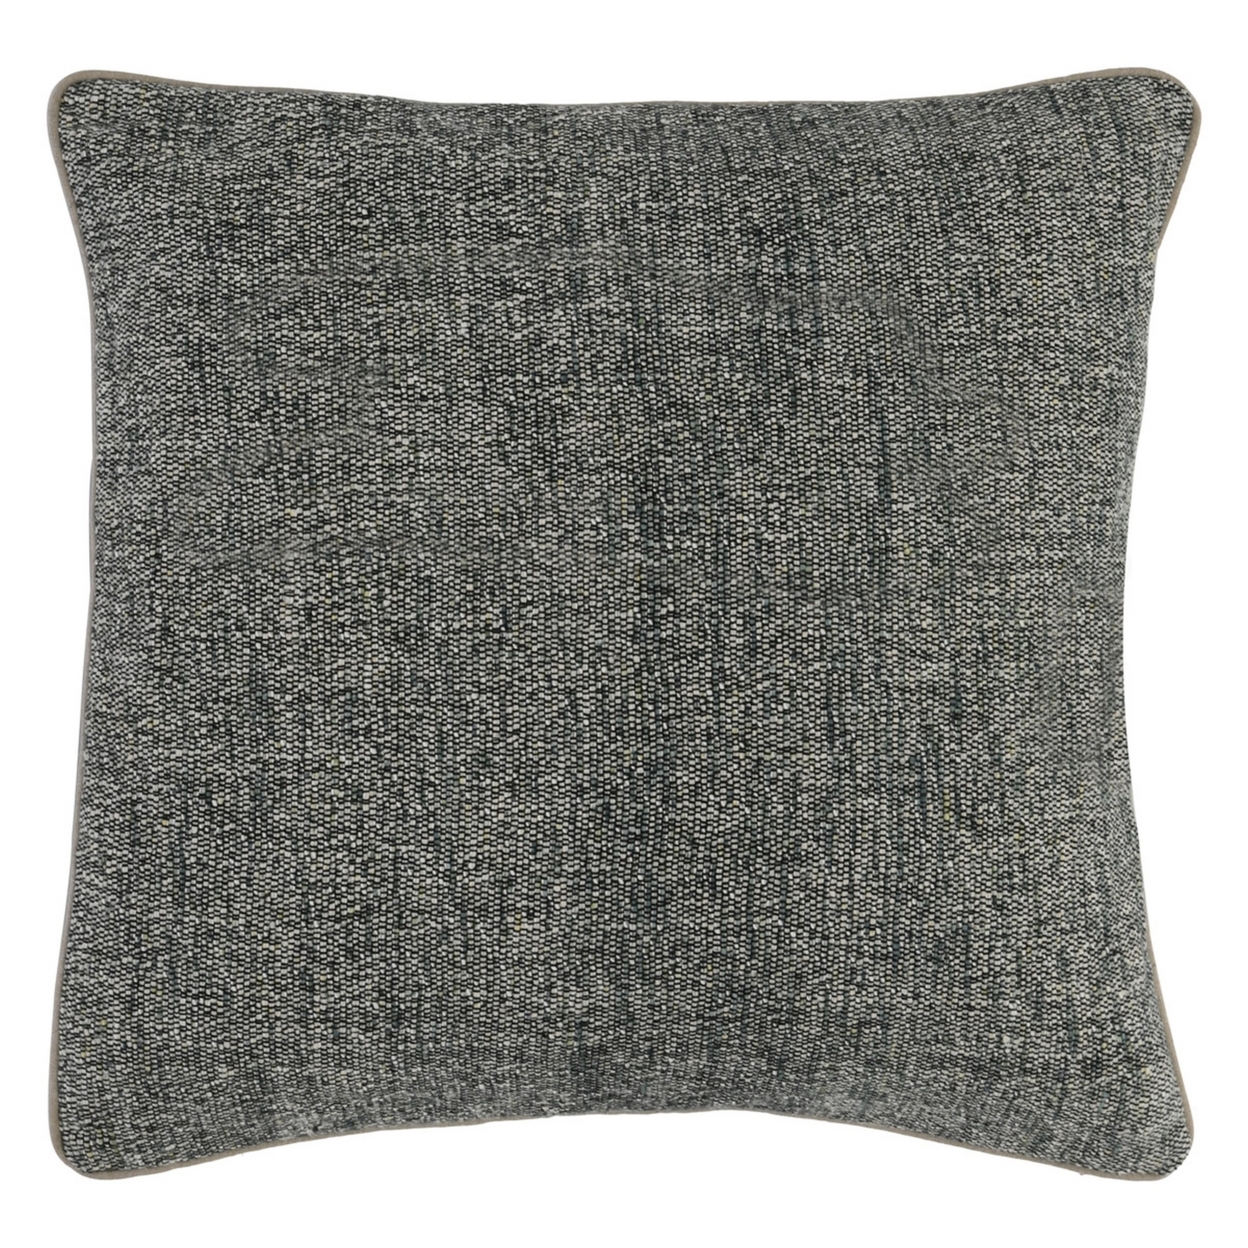 22 Inch Square Woven Cotton Accent Throw Pillow, Piped Edges, Down, Gray- Saltoro Sherpi